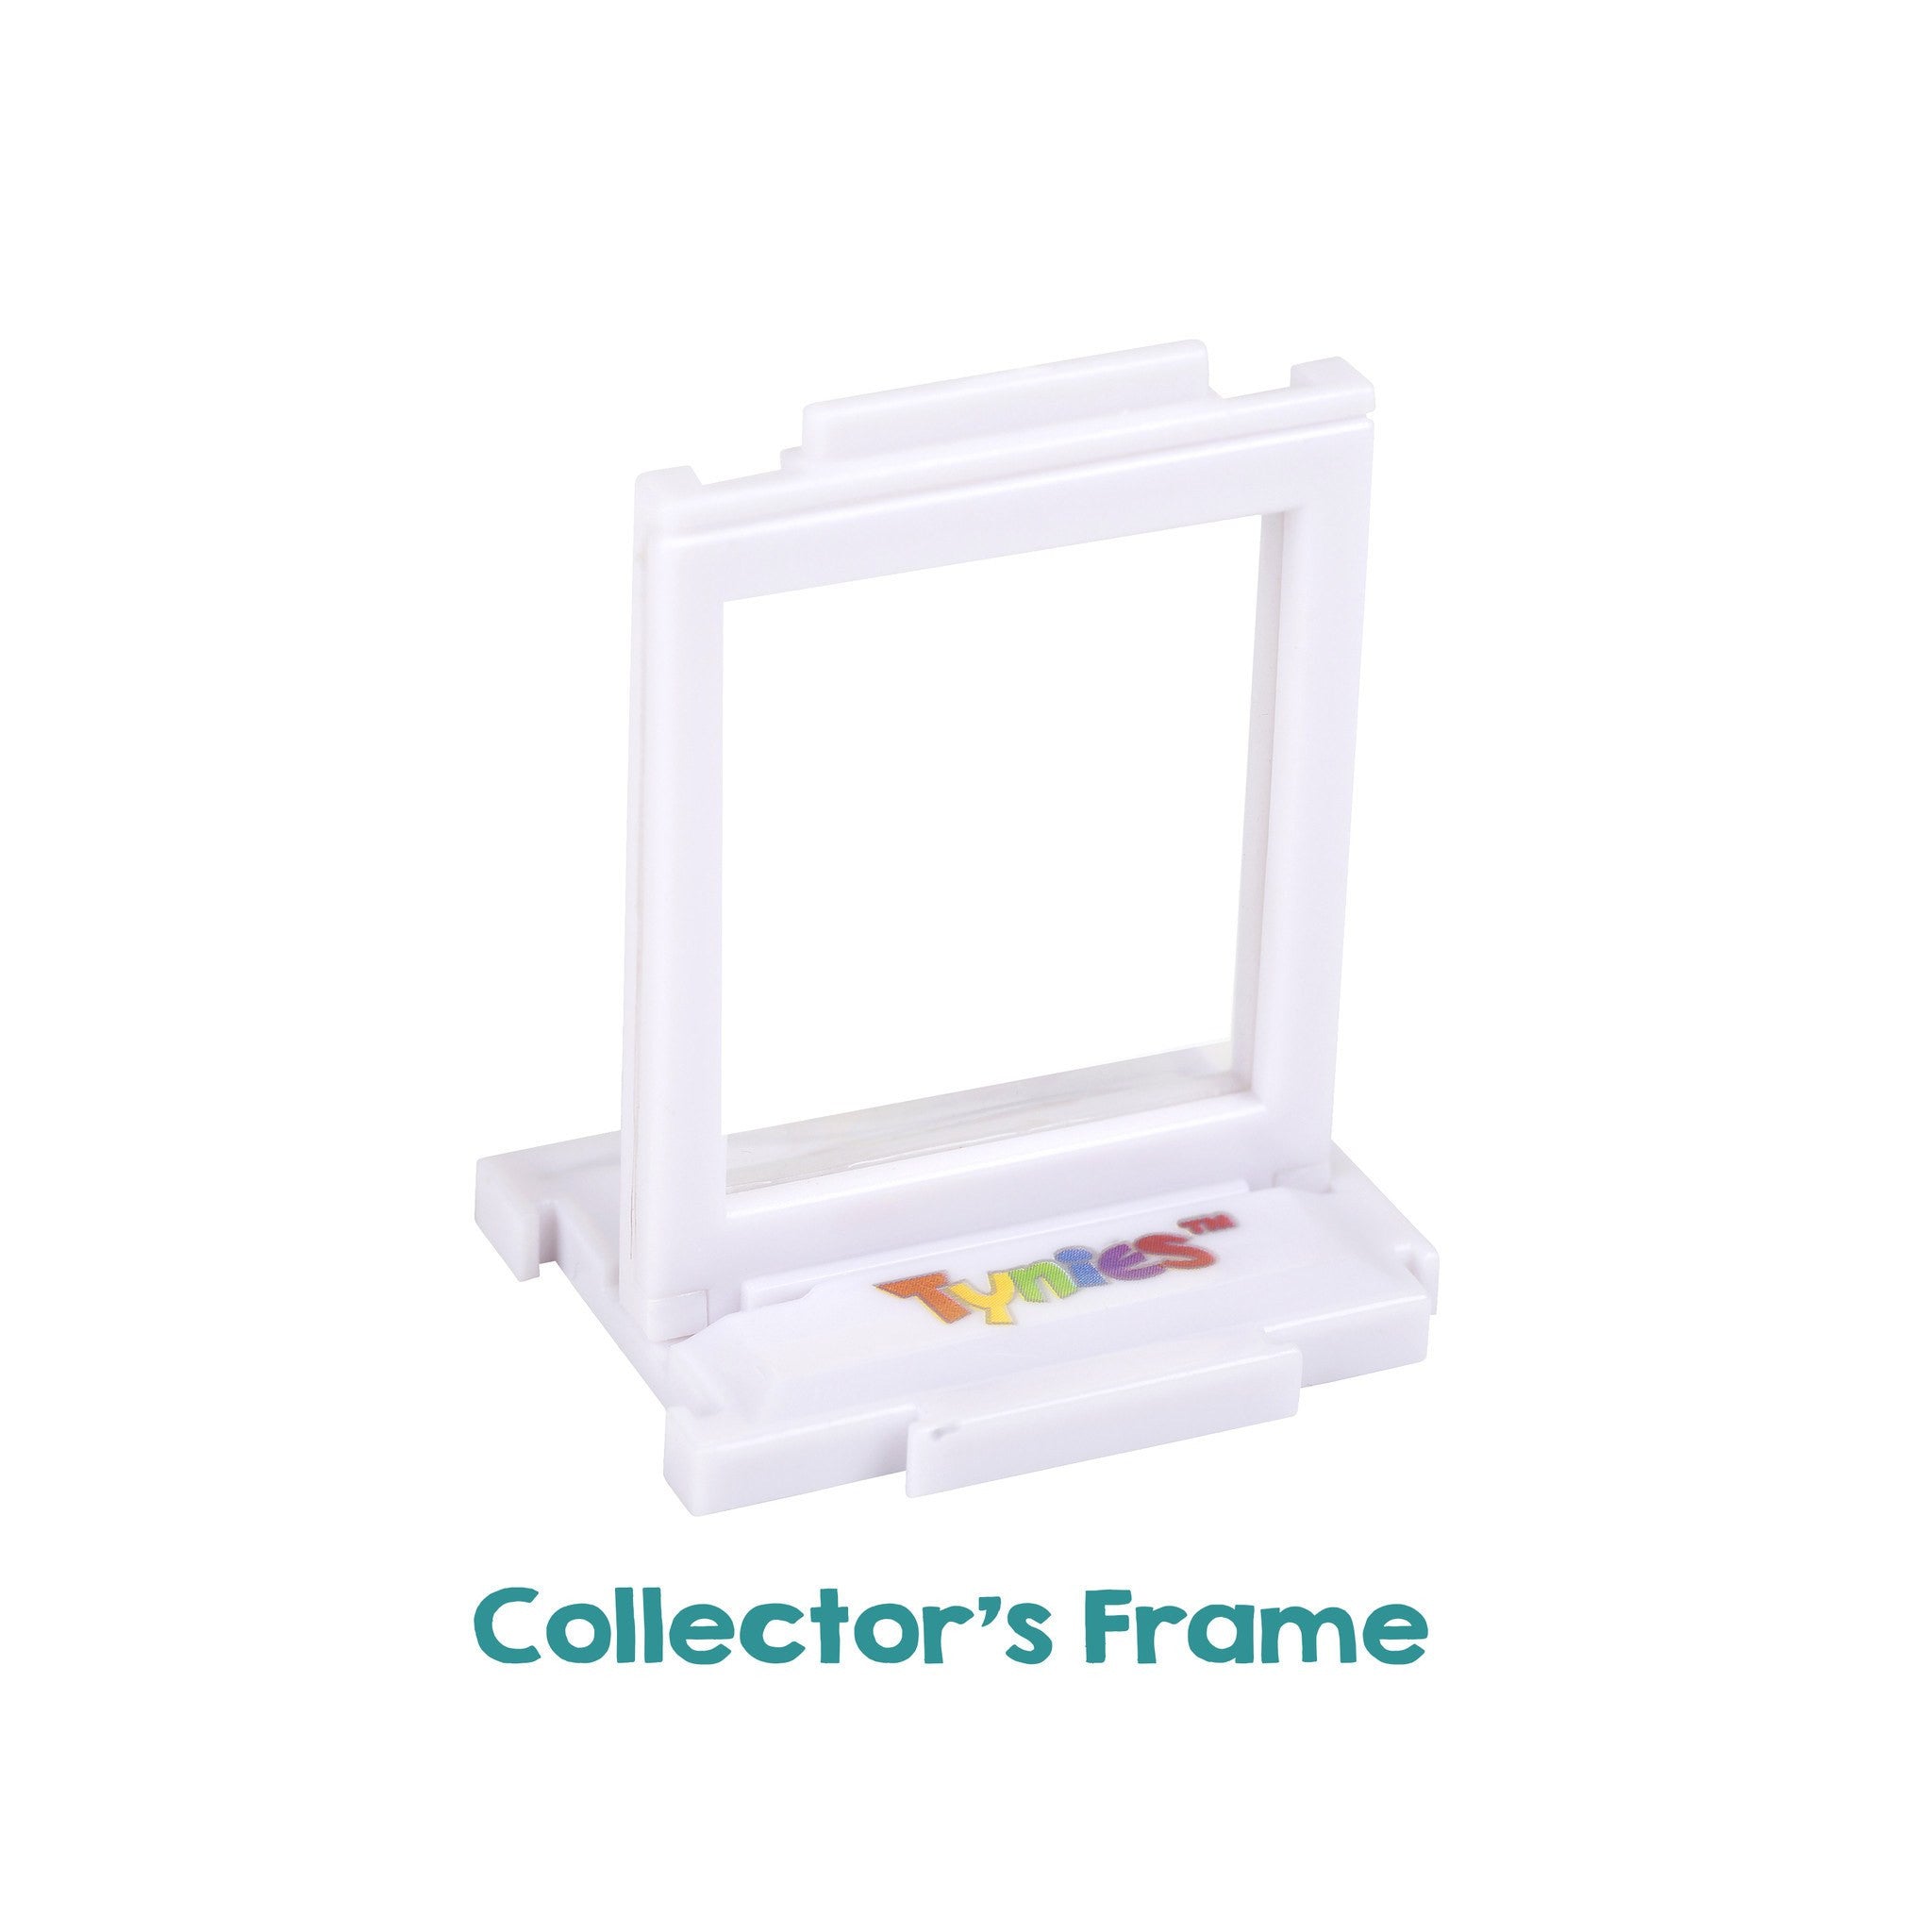 Collector's Frame Miniature glass figurines 